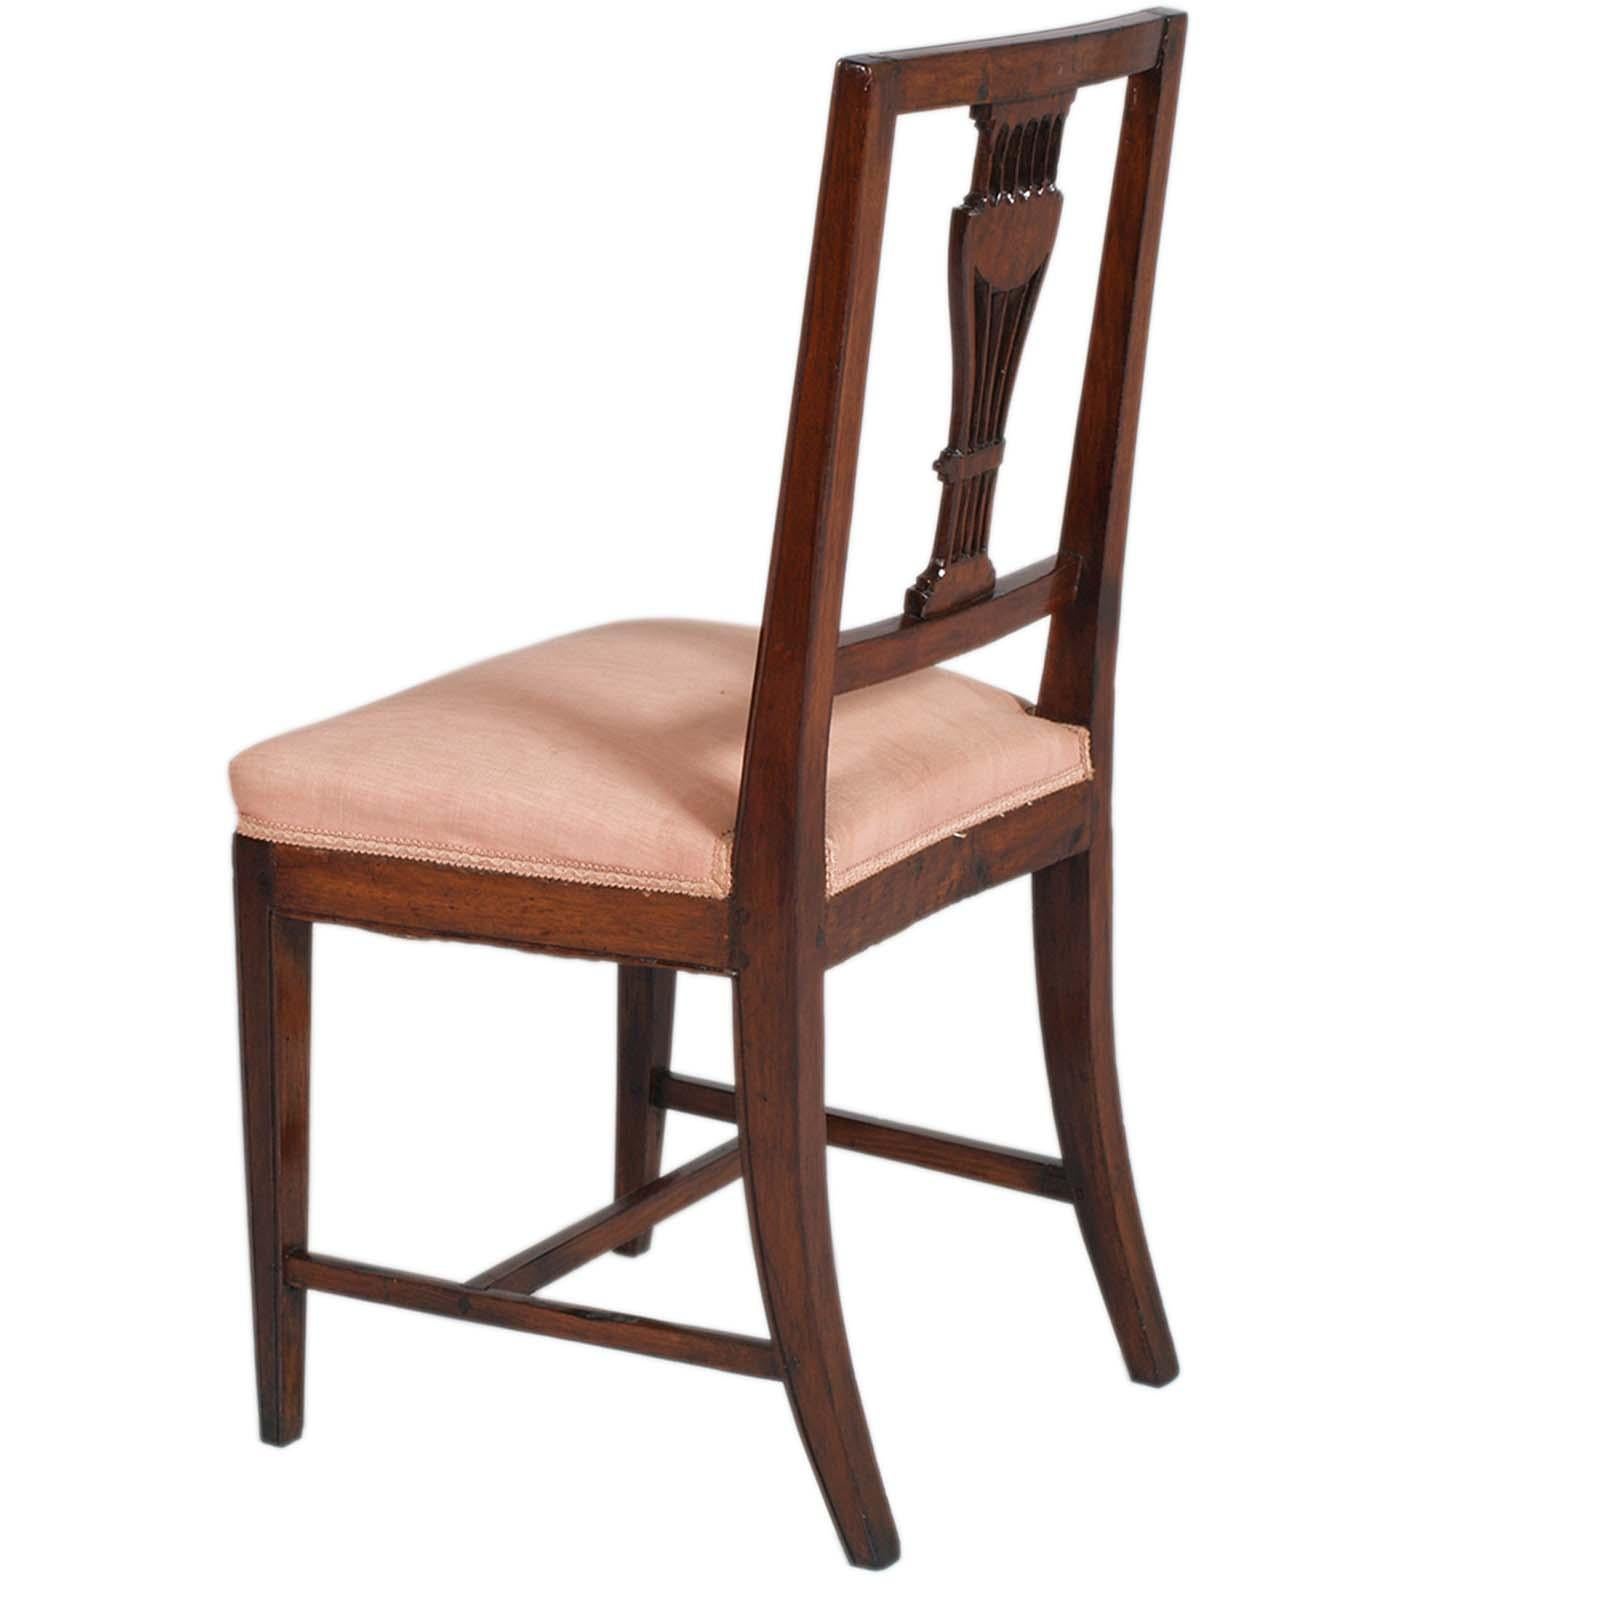 Early 20th Century Venetian Six Asolane Biedermeier Chairs in Walnut, Lyre-Shaped Back, Hand-Carved For Sale